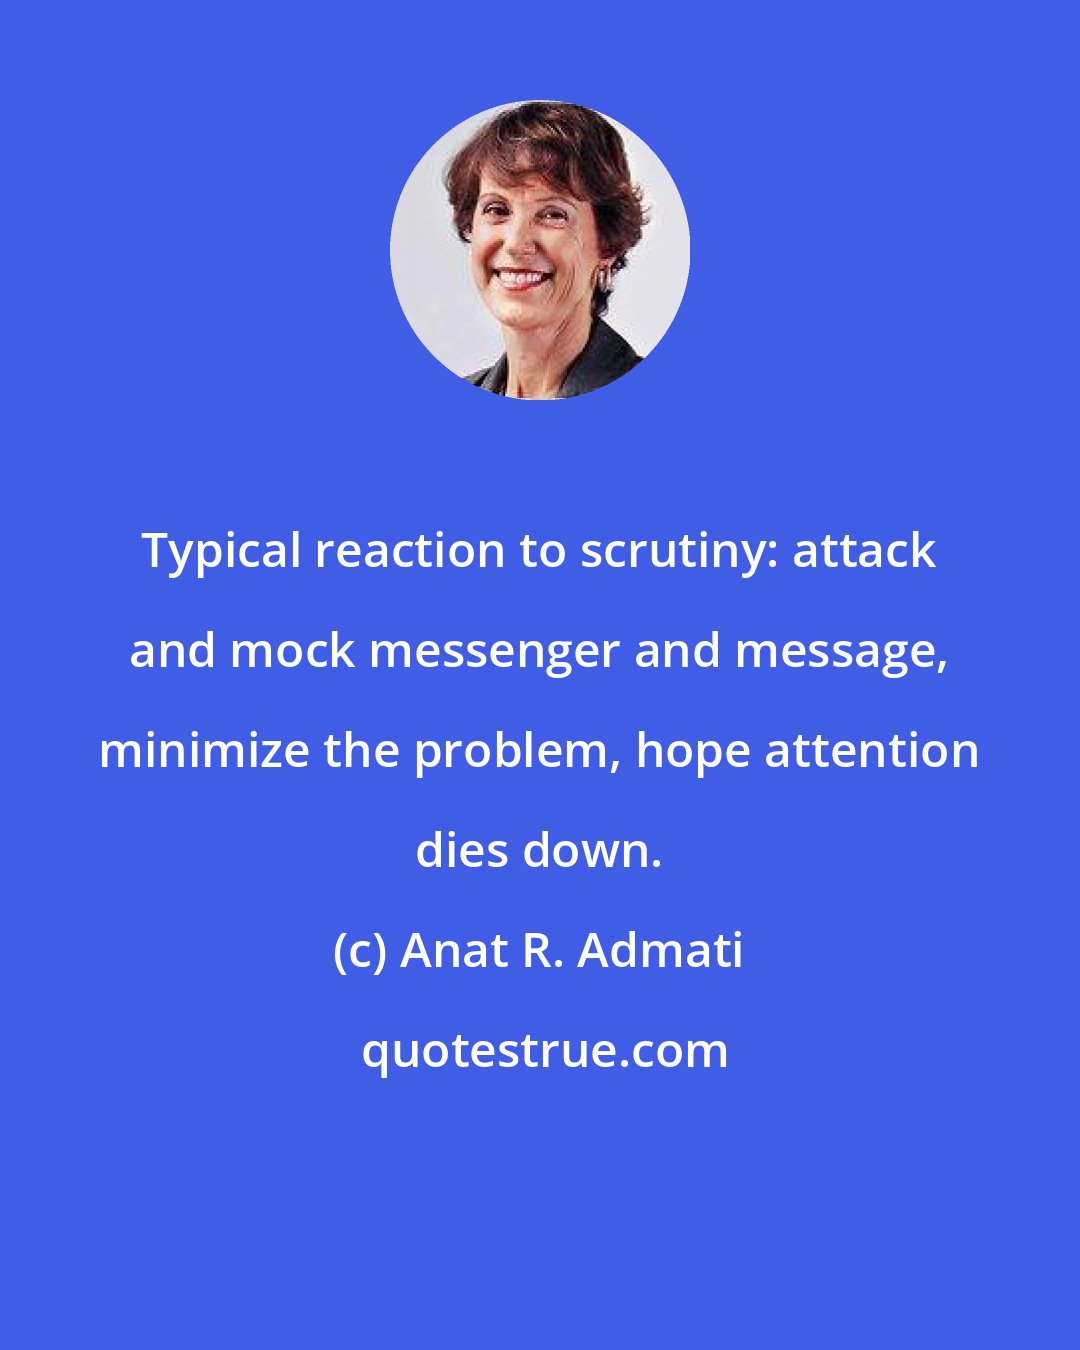 Anat R. Admati: Typical reaction to scrutiny: attack and mock messenger and message, minimize the problem, hope attention dies down.